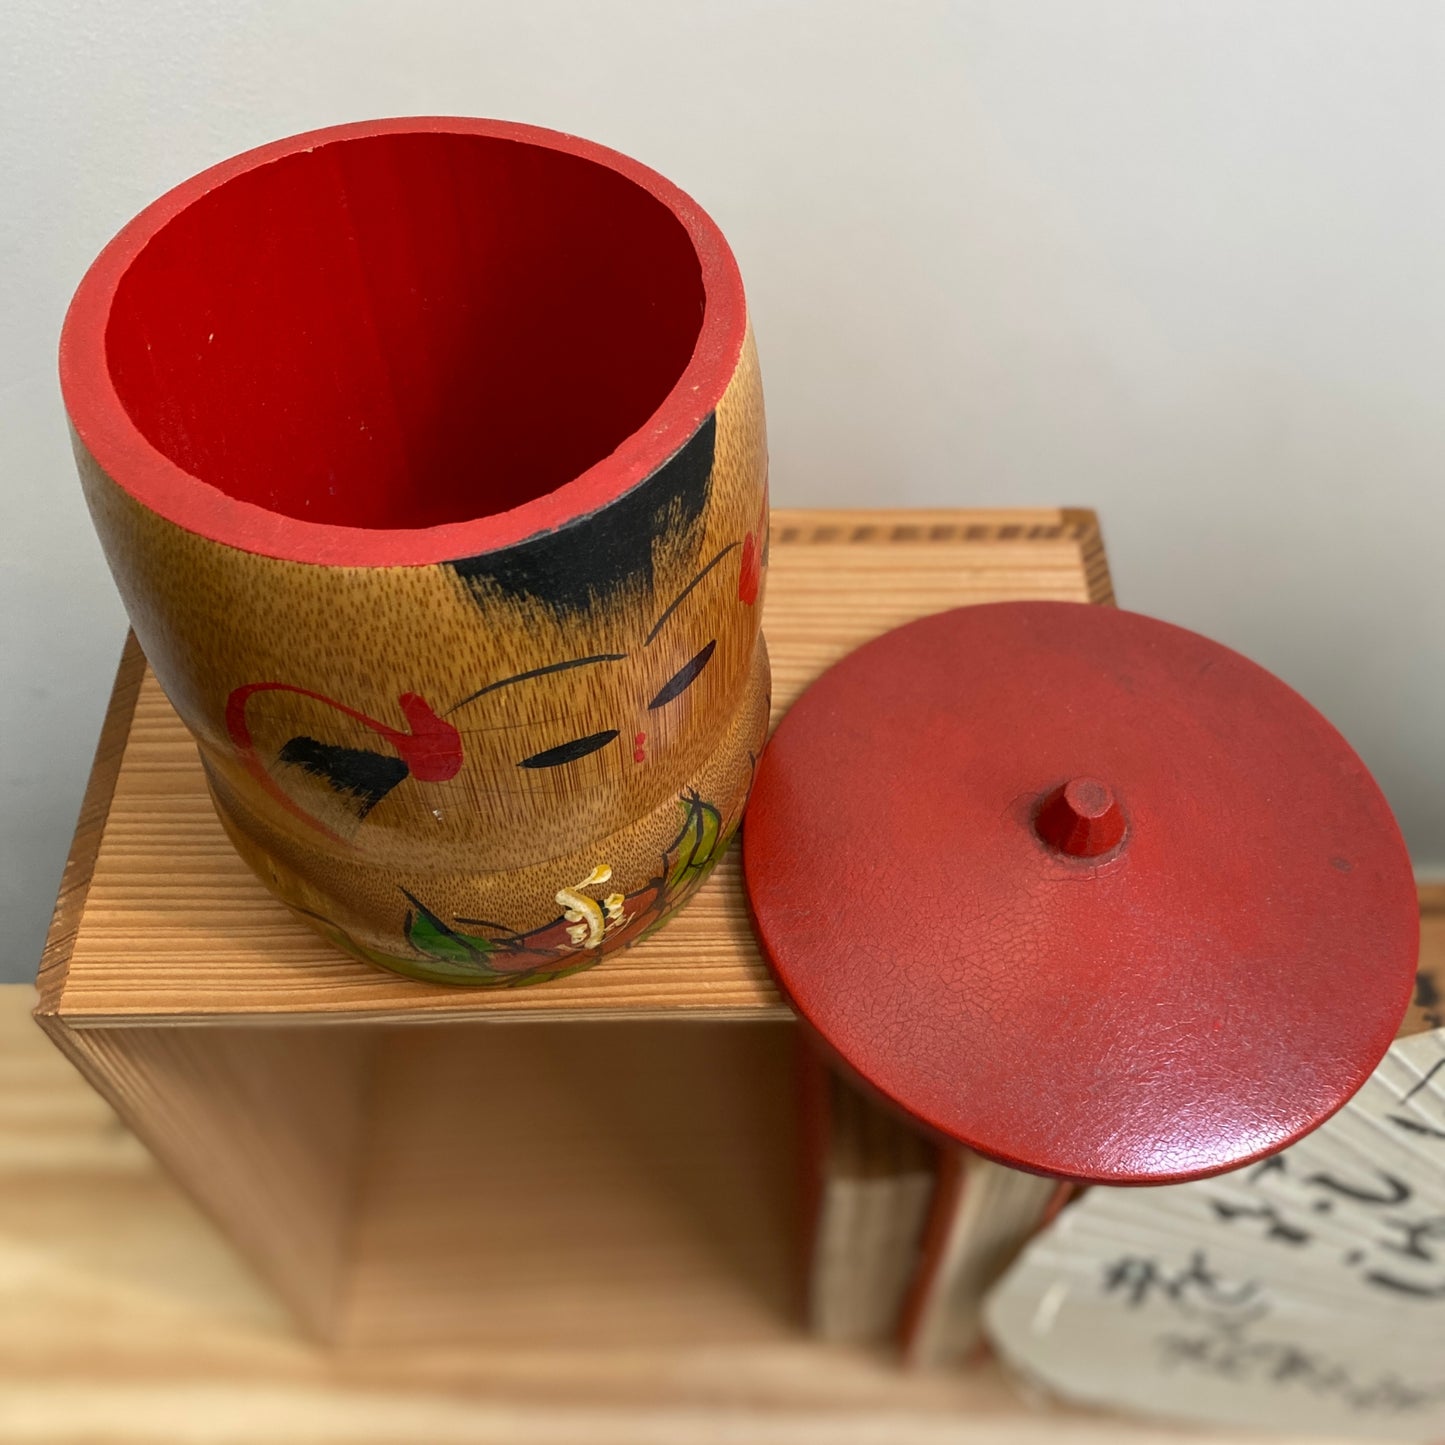 vintage japanese kokeshi container